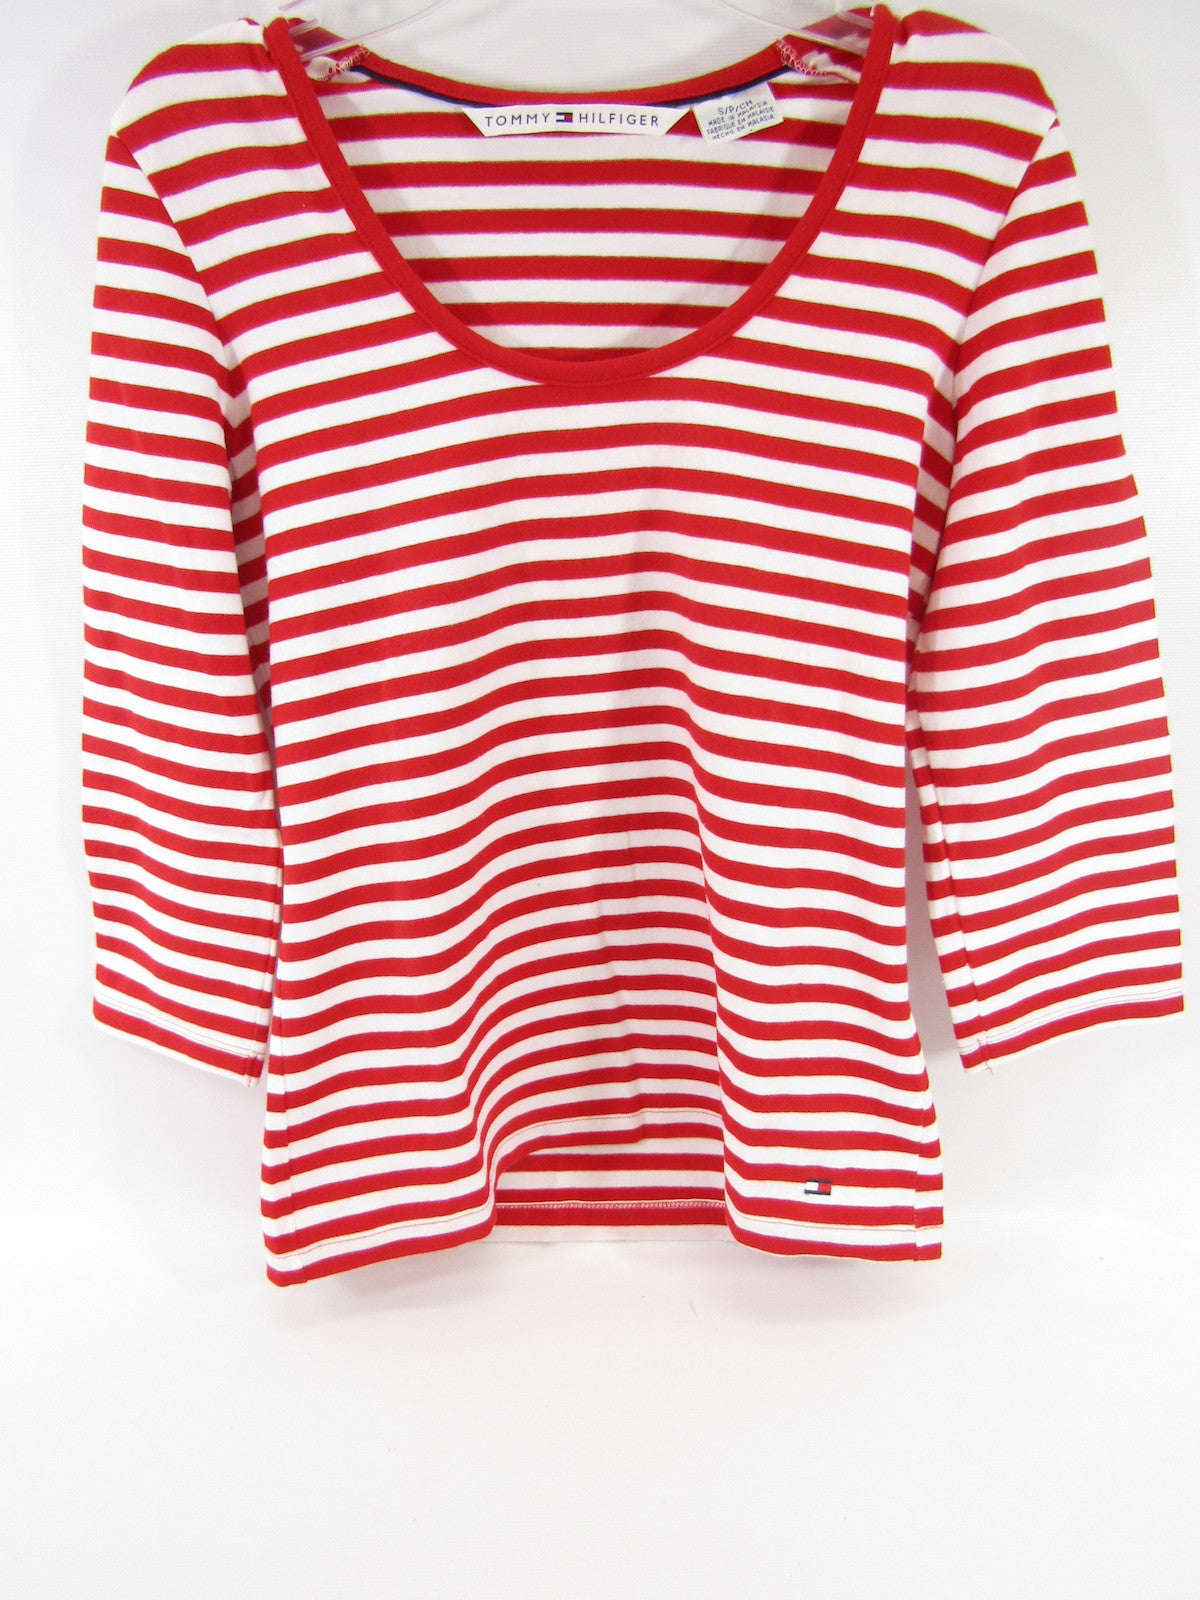 ladies red and white striped shirt